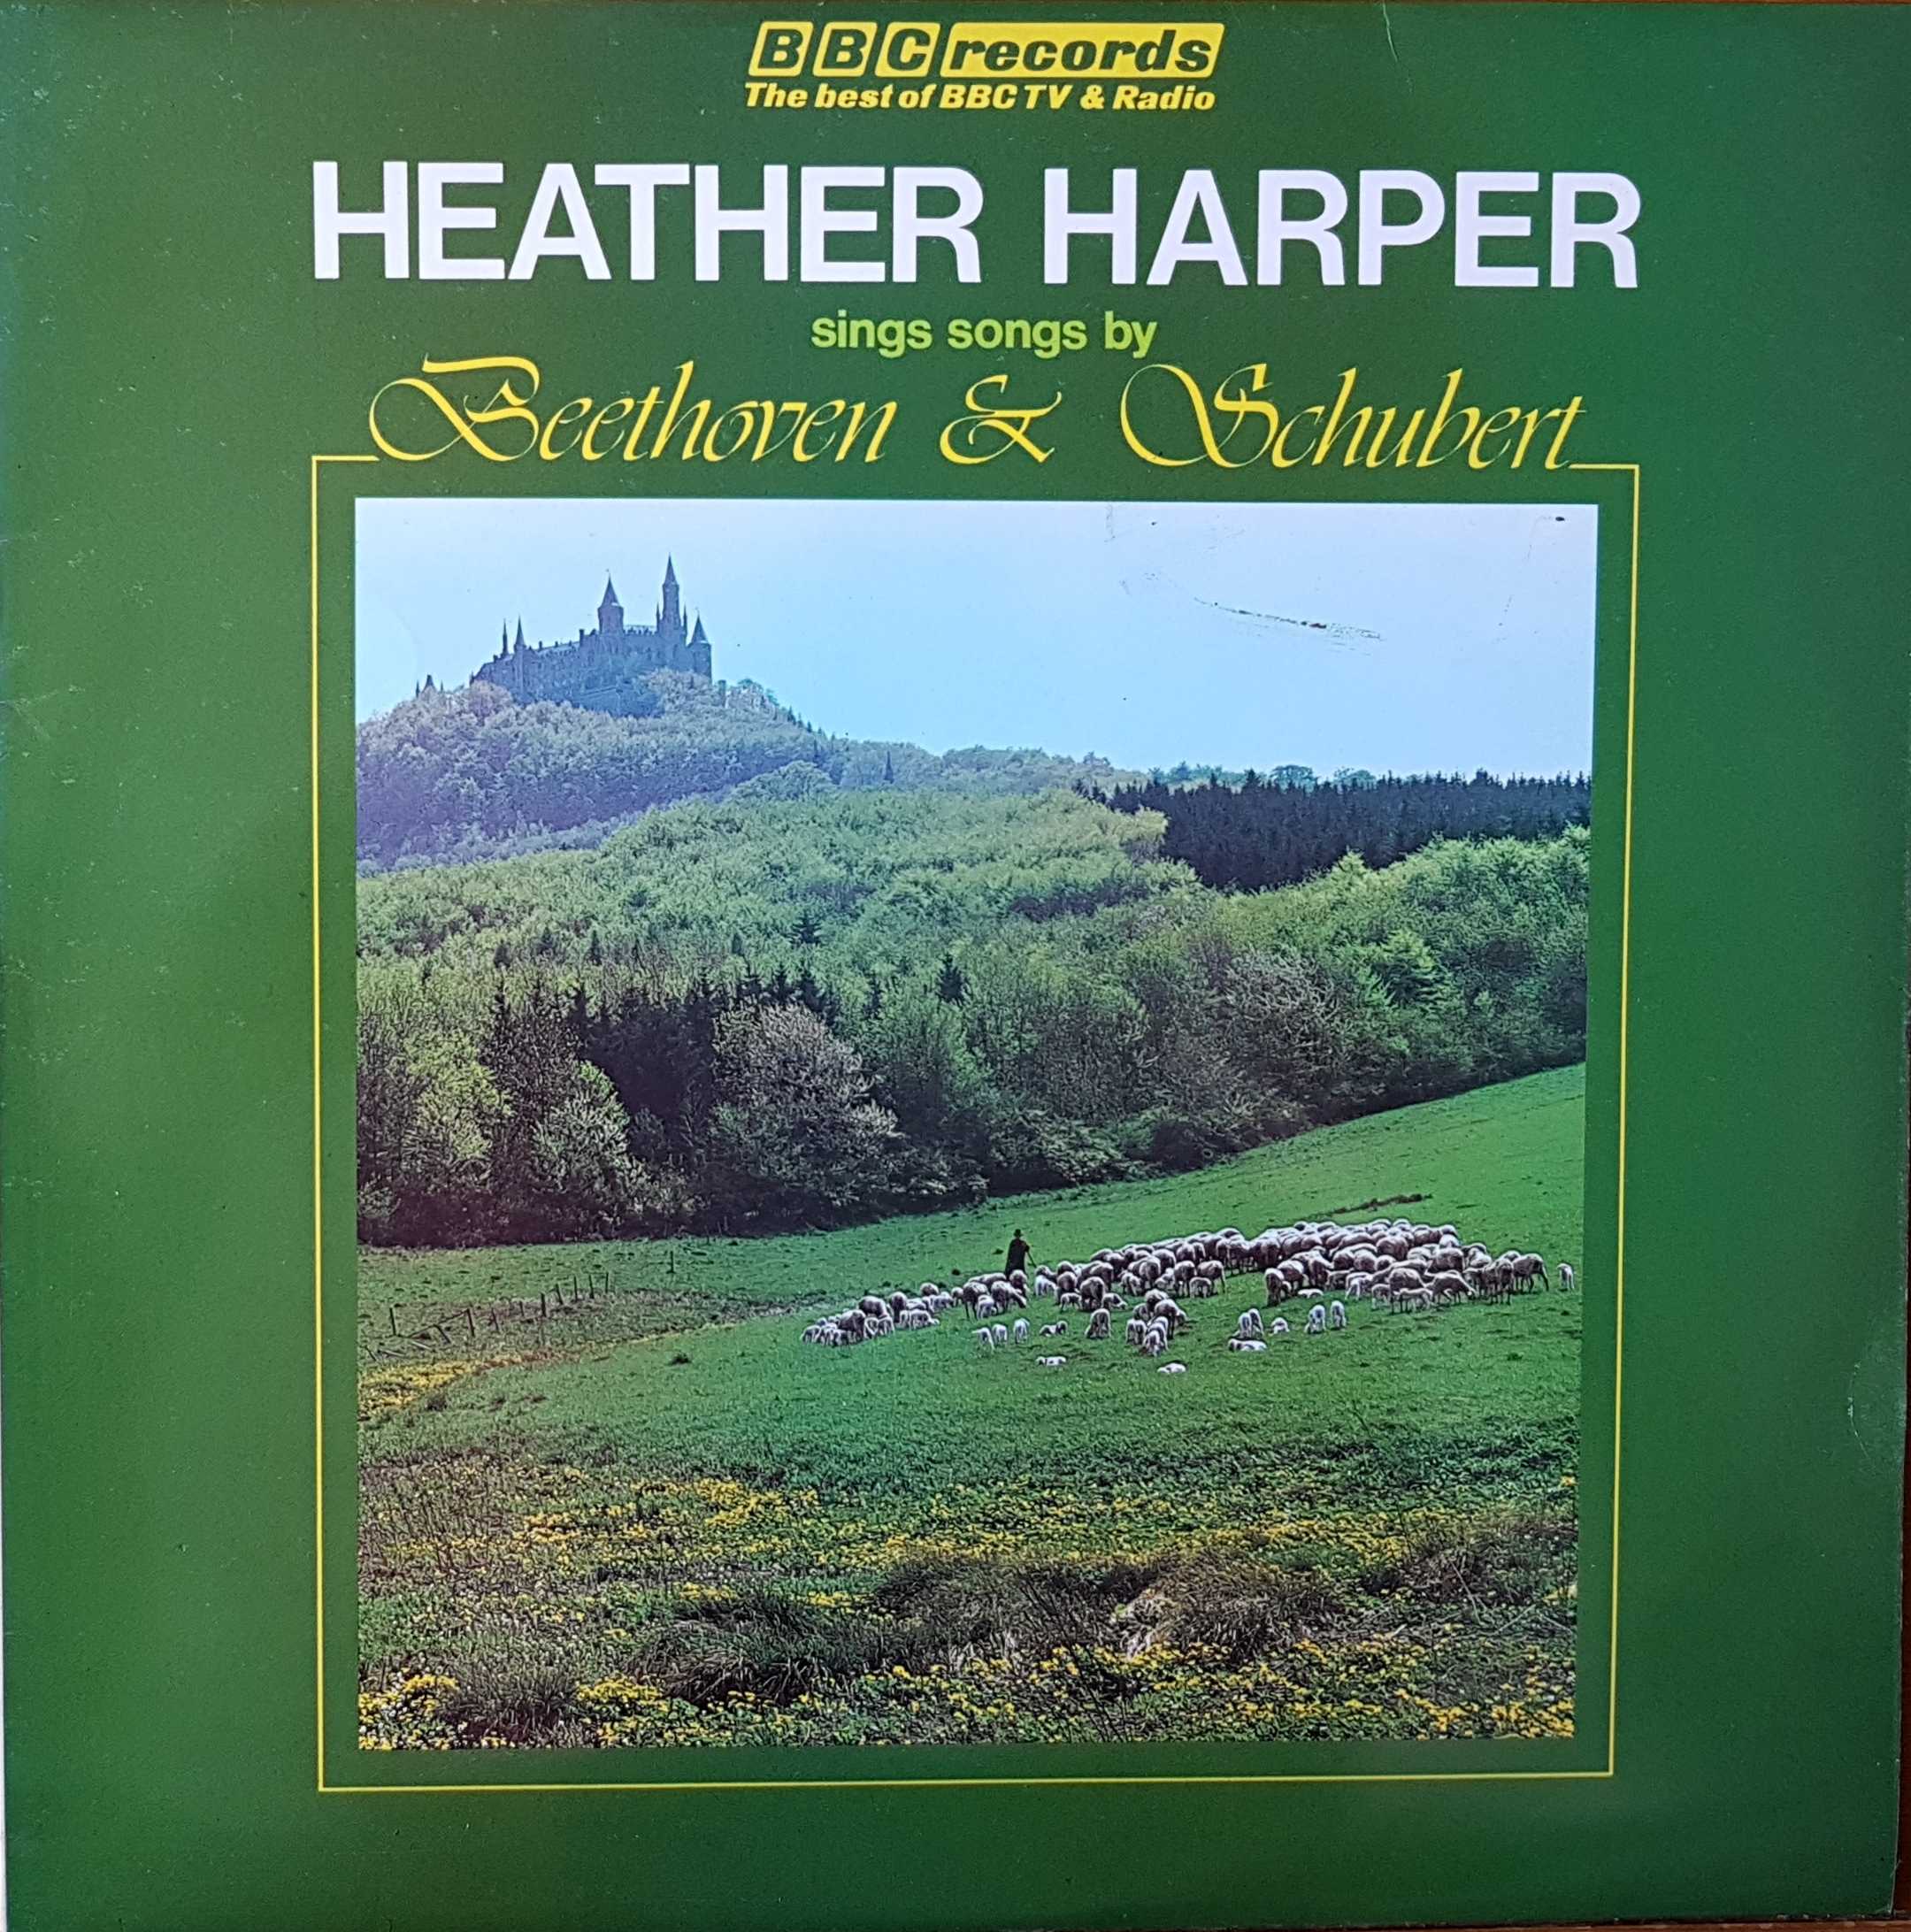 Picture of REB 170 Sings Songs By Beethoven & Schubert - Heather Harper by artist Heather Harper from the BBC albums - Records and Tapes library